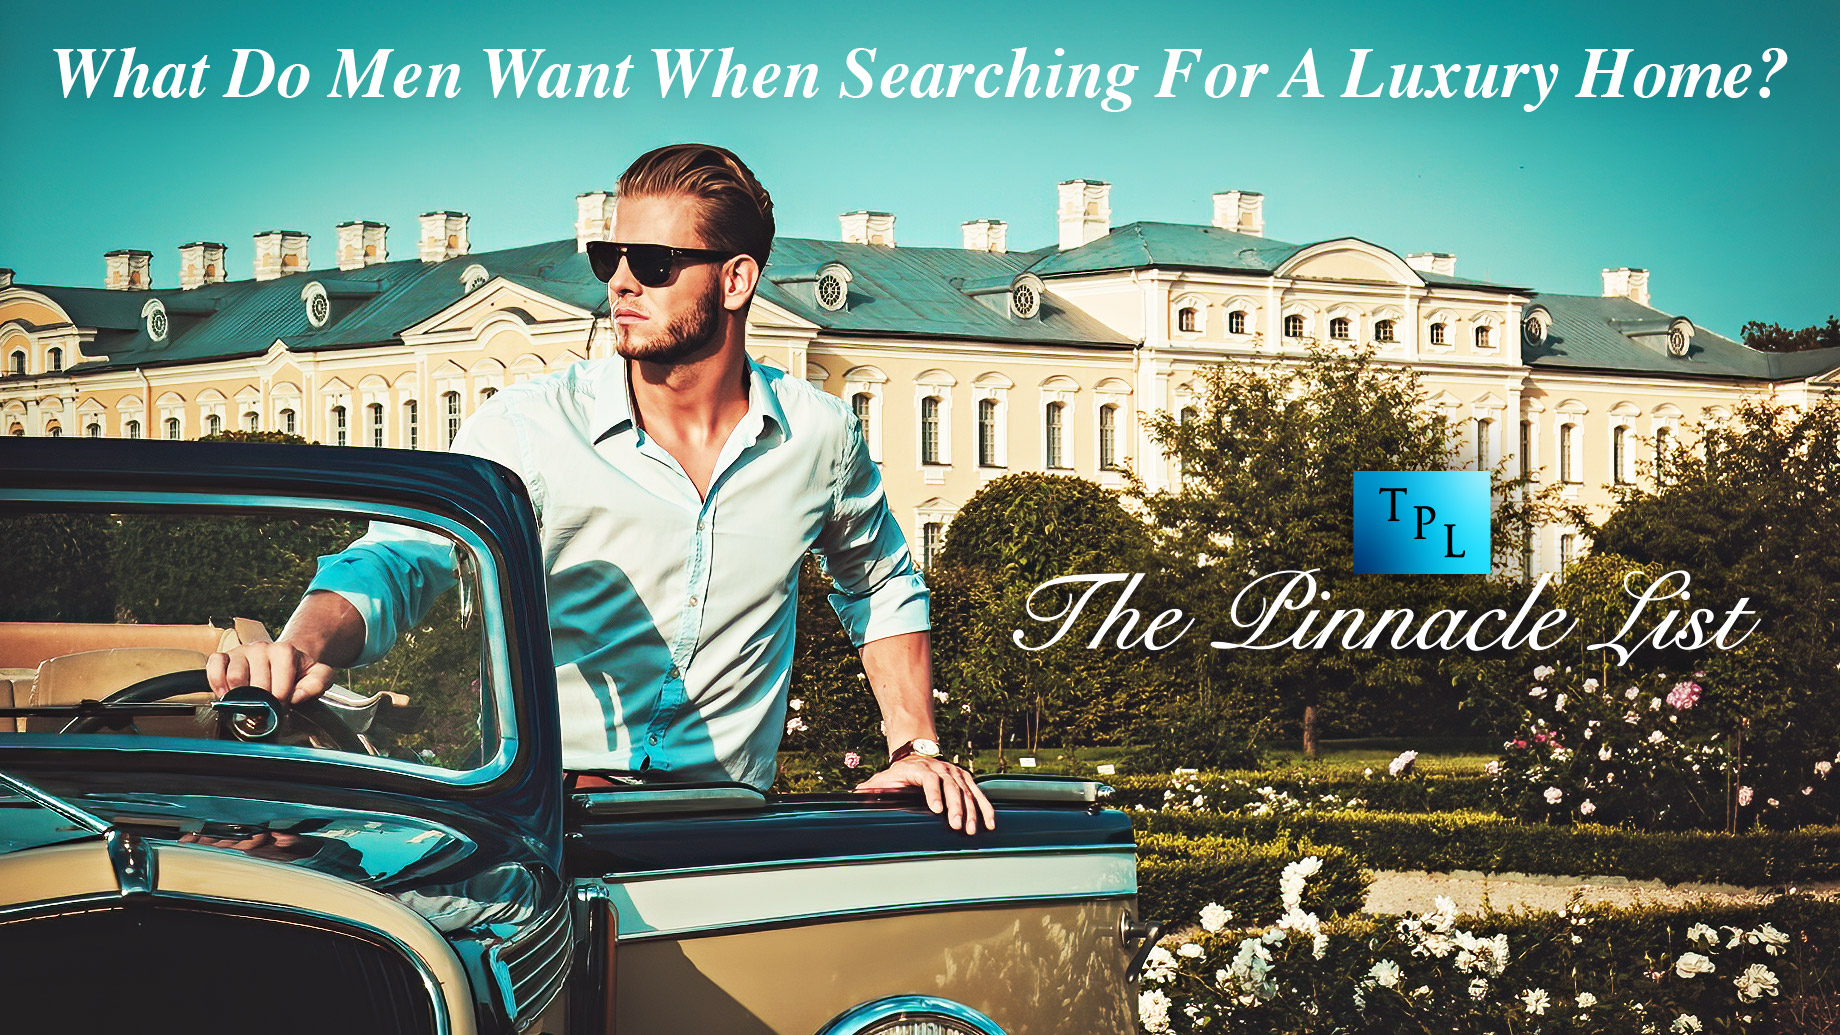 What Do Men Want When Searching For A Luxury Home?